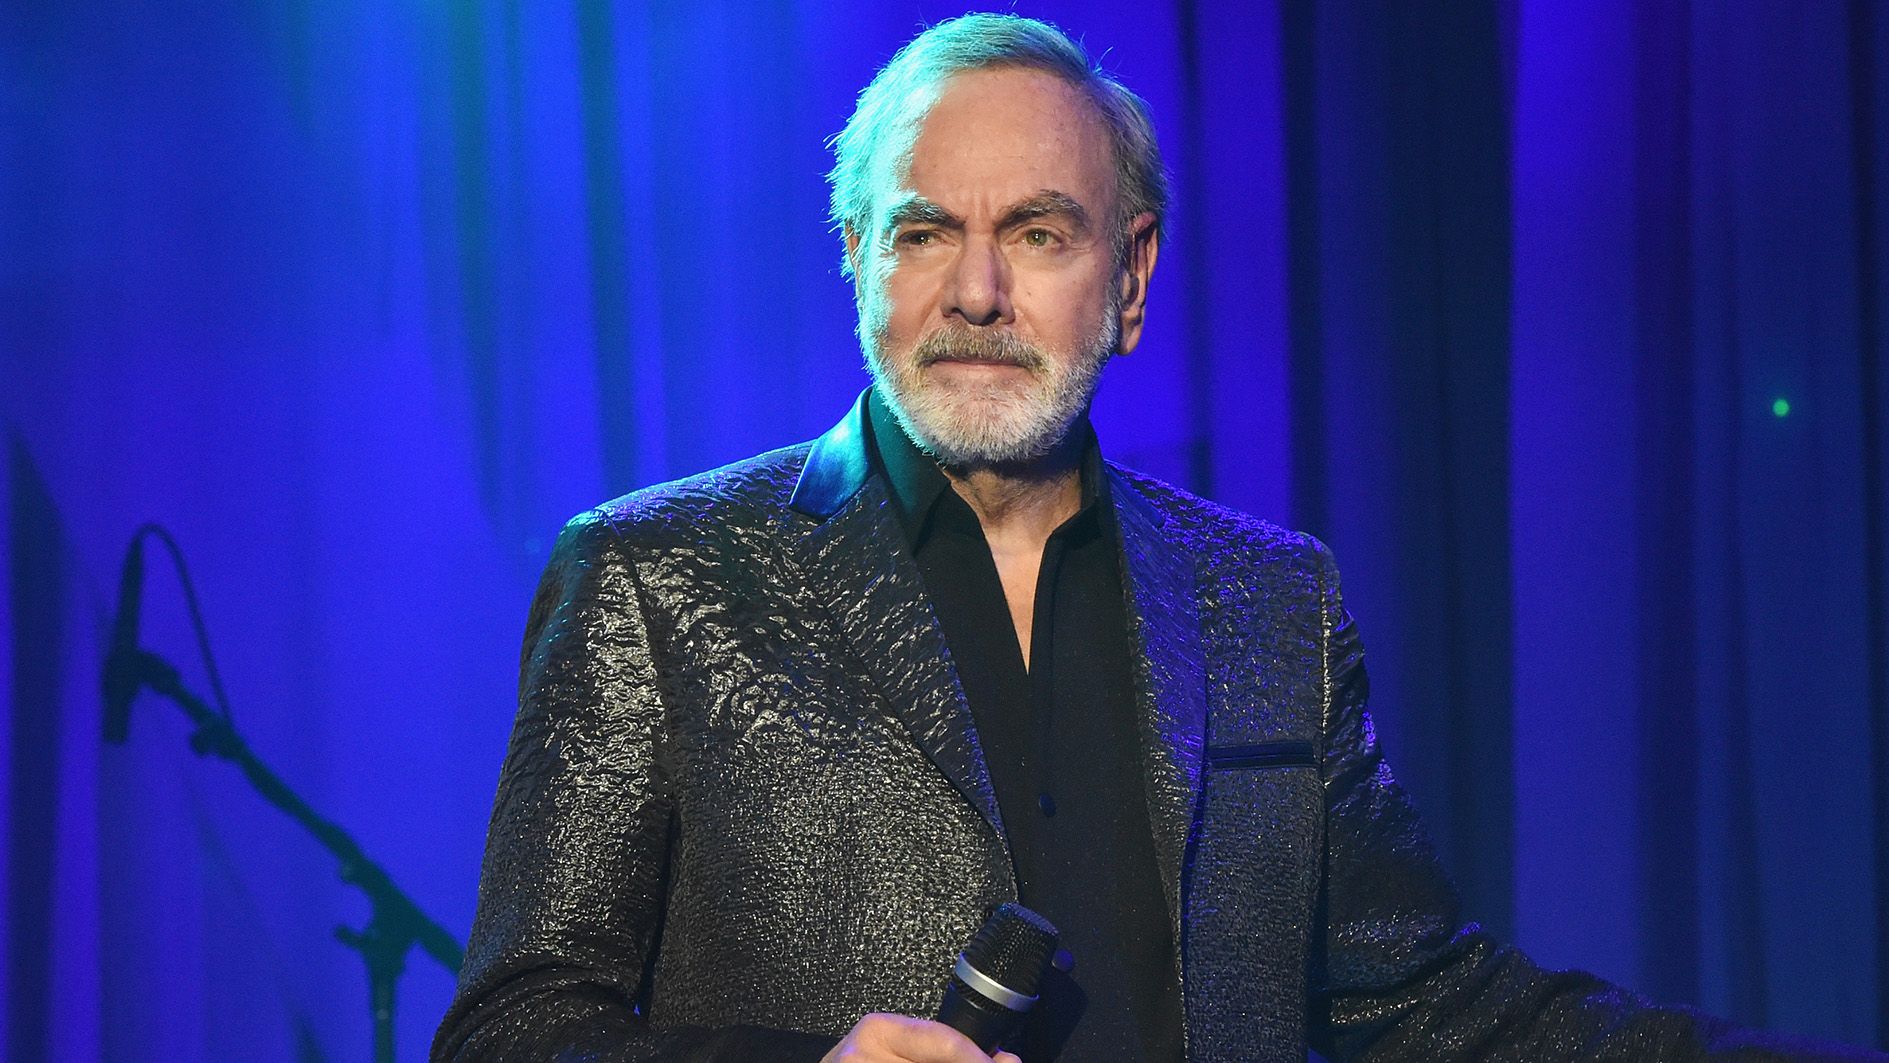 Neil Diamond fans, this excellent BBC 'In Concert' show from 1971 is a  must-see